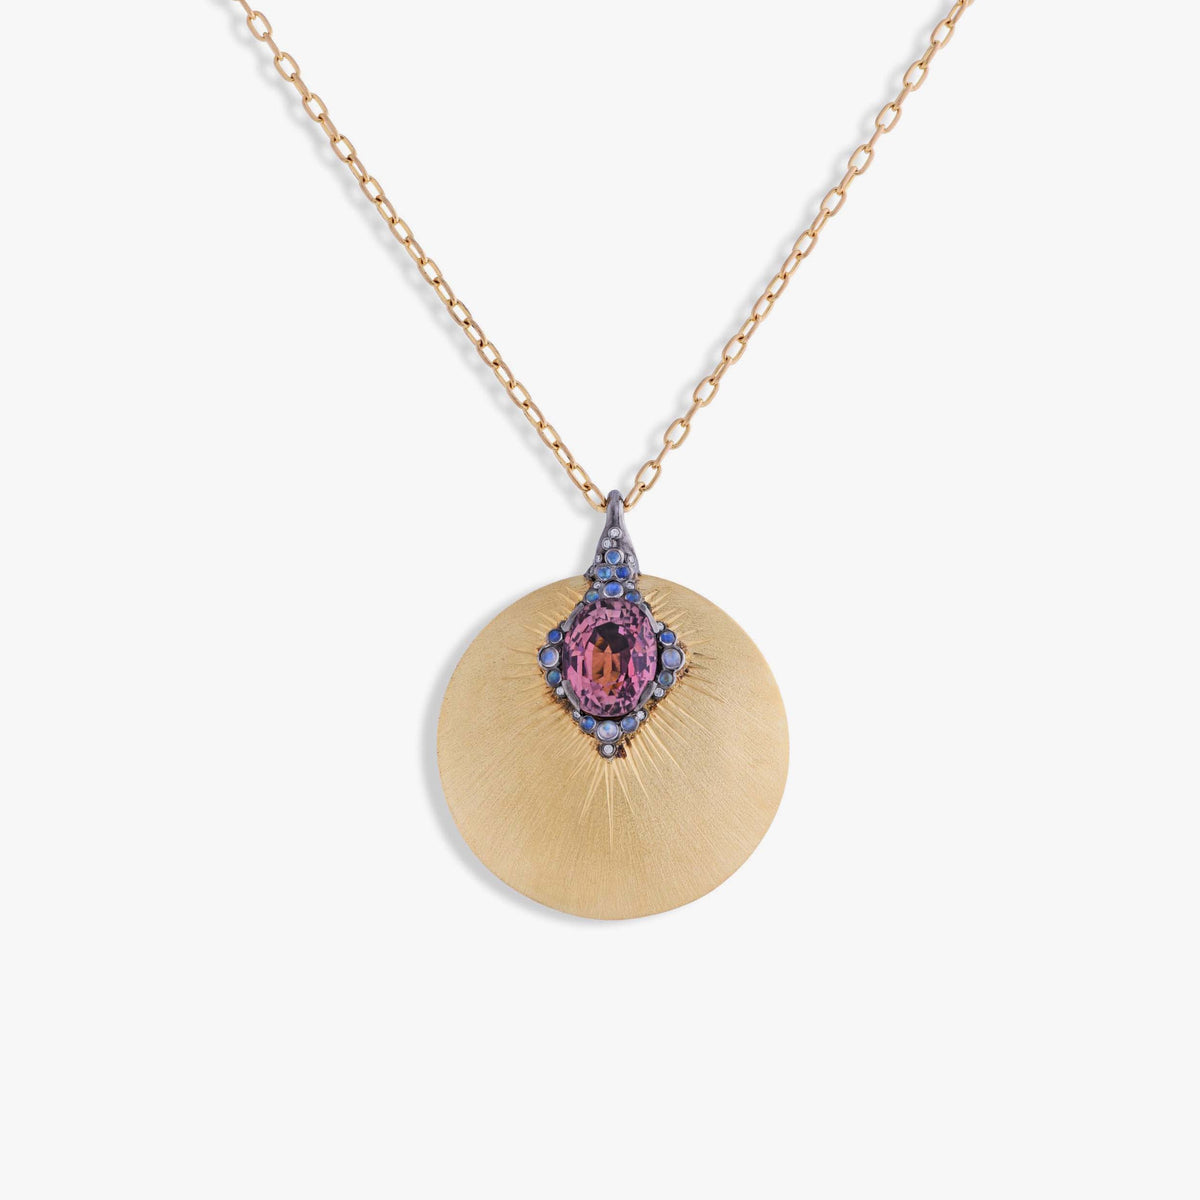 Constellation disc pendant necklace with pink tourmaline, moonstone and diamonds